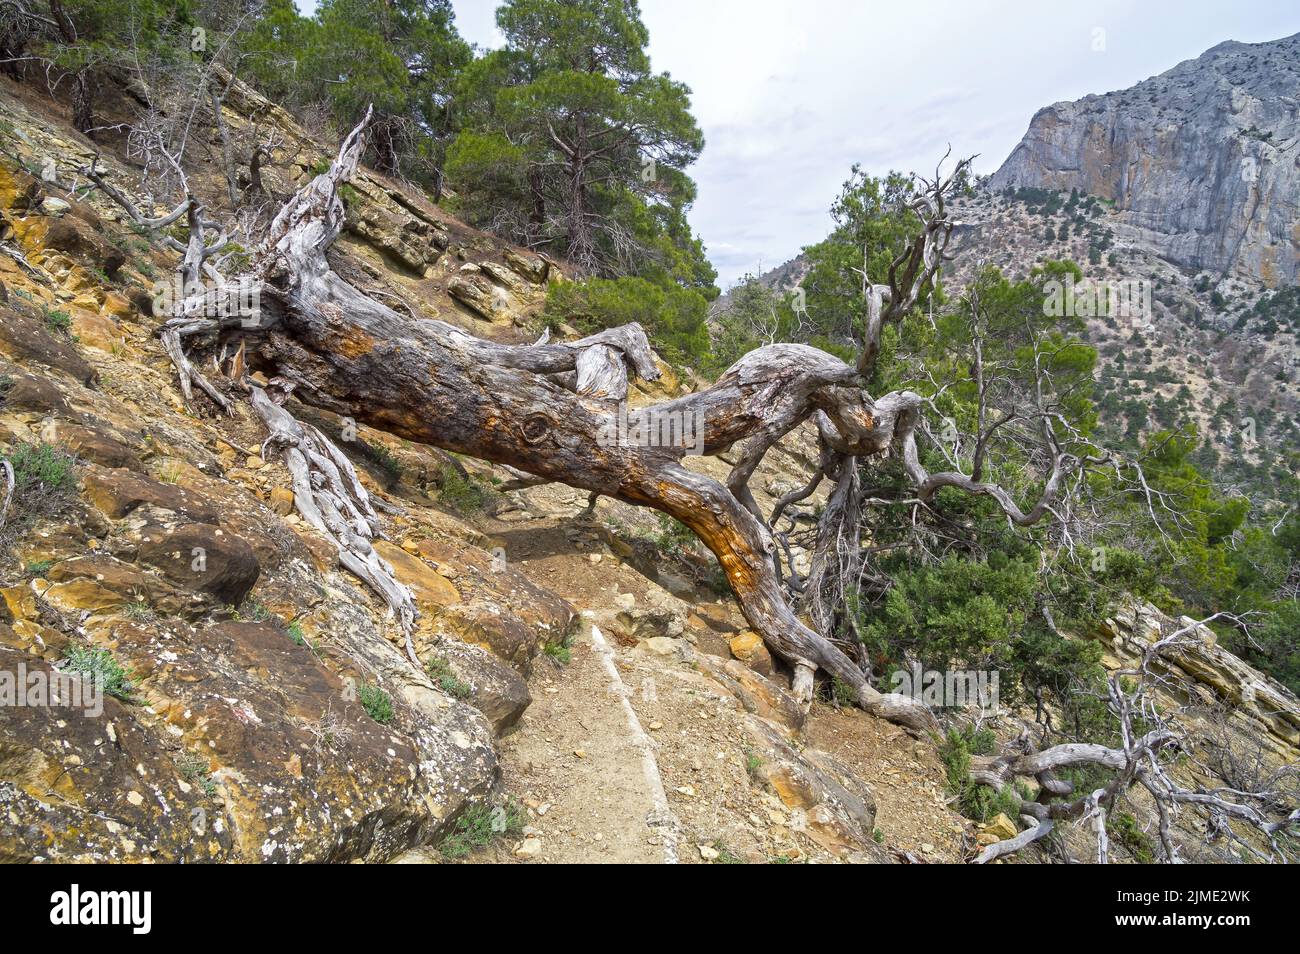 A dried relict pine tree fell on a path in the mountains. Stock Photo